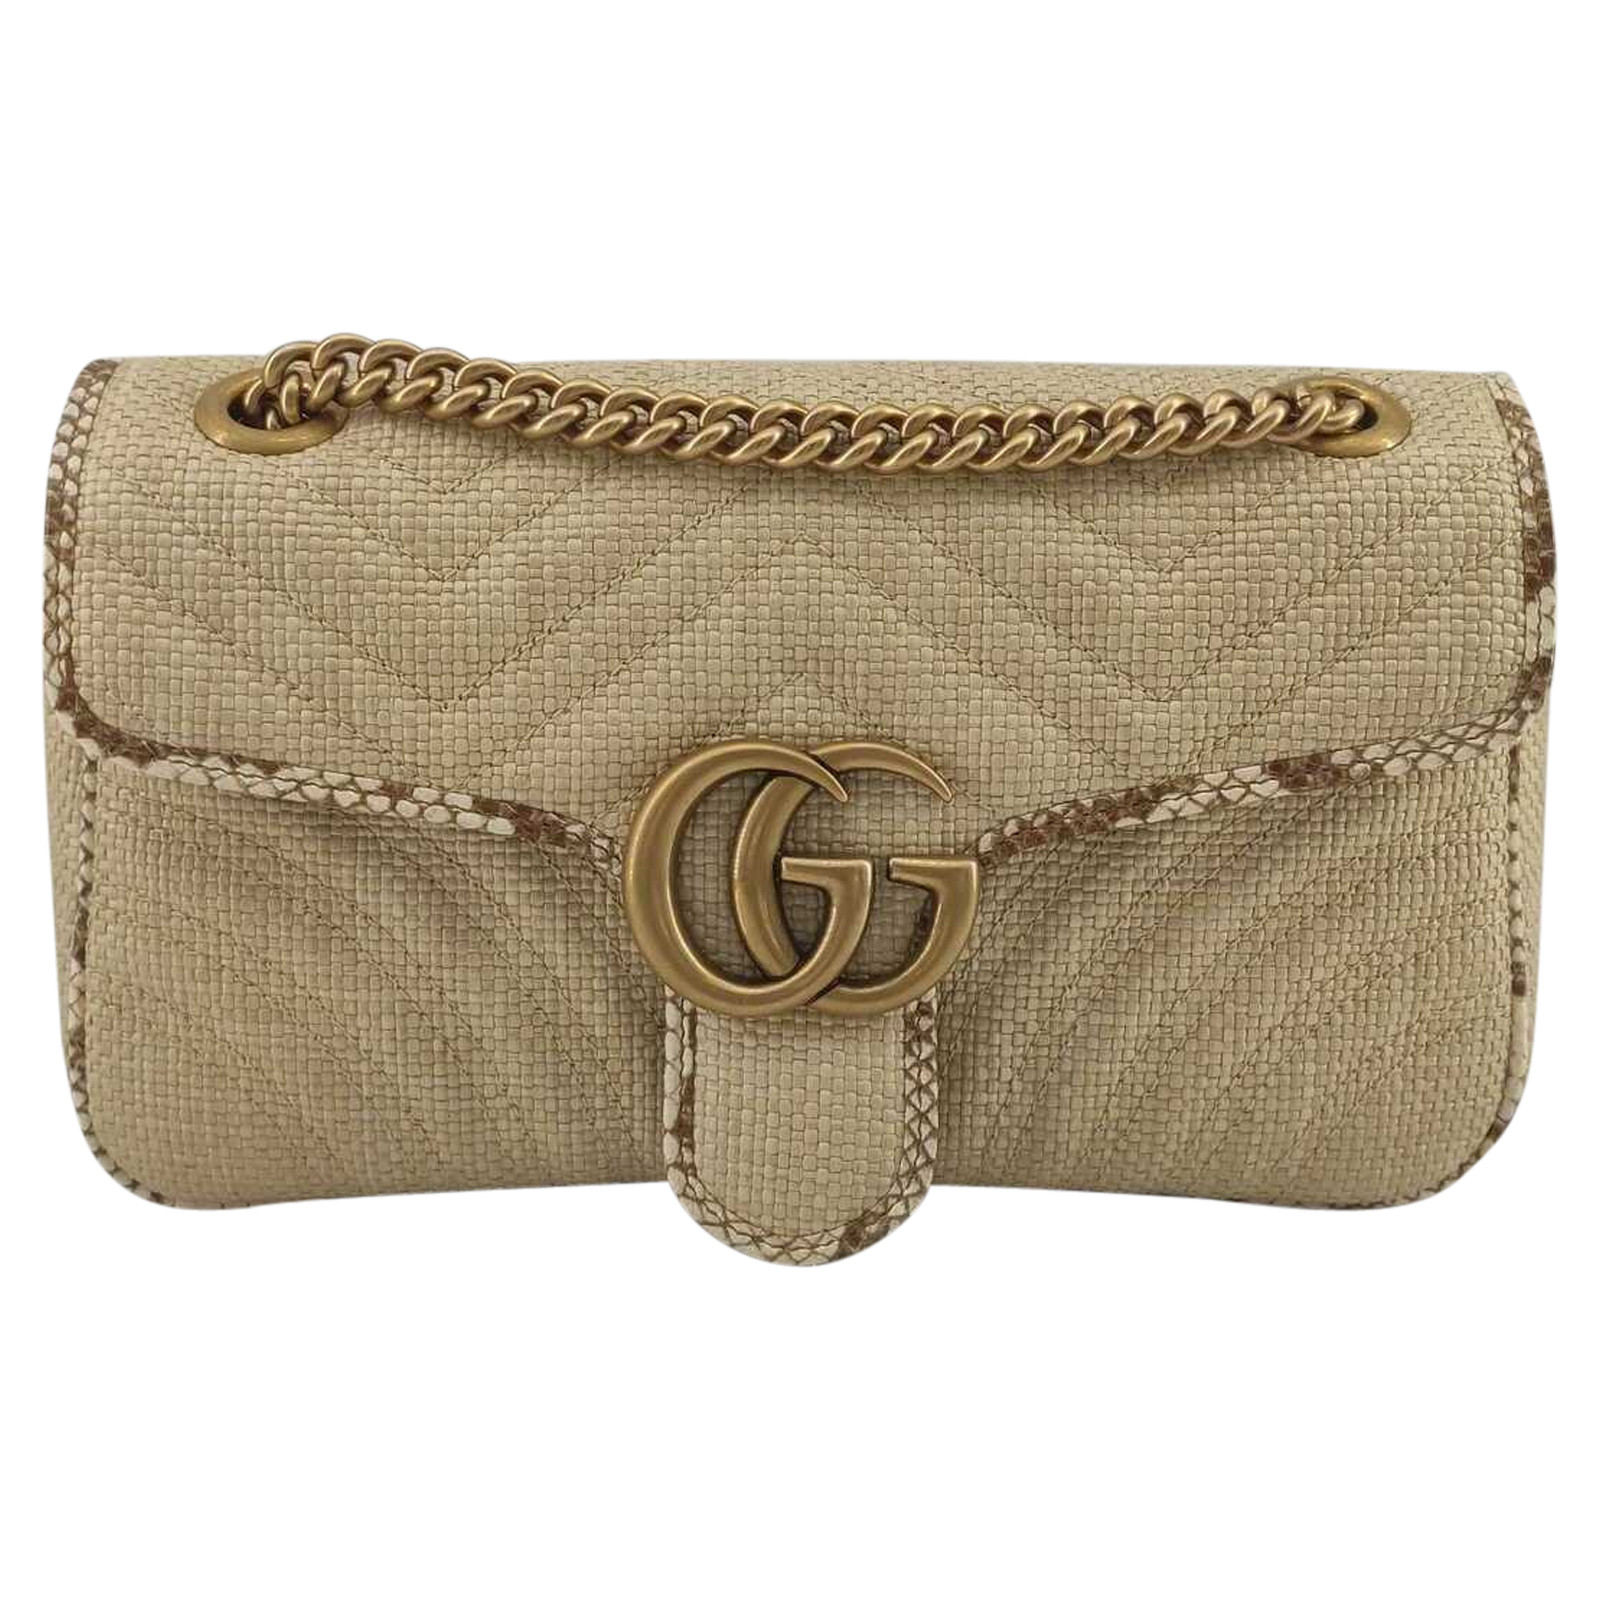 Gucci GG Marmont Flap Bag Normal Canvas in - Second Hand Gucci GG Marmont Flap Bag Normal Canvas in Beige buy used 1540€